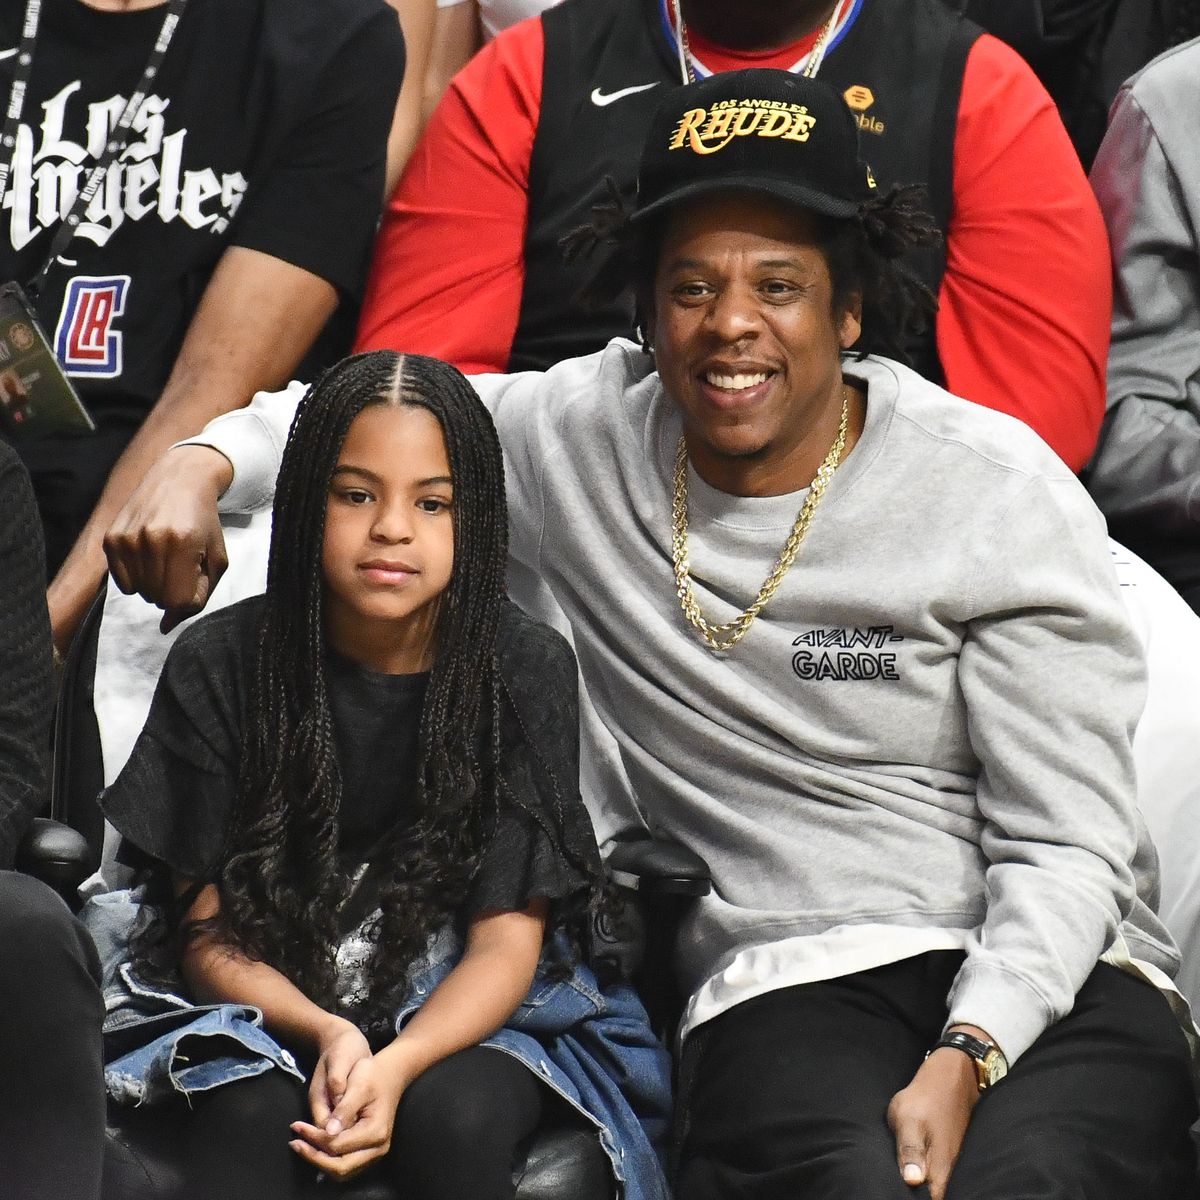 Blue Ivy Carter Helped Induct of Fame Her Jay-Z Into Hall the